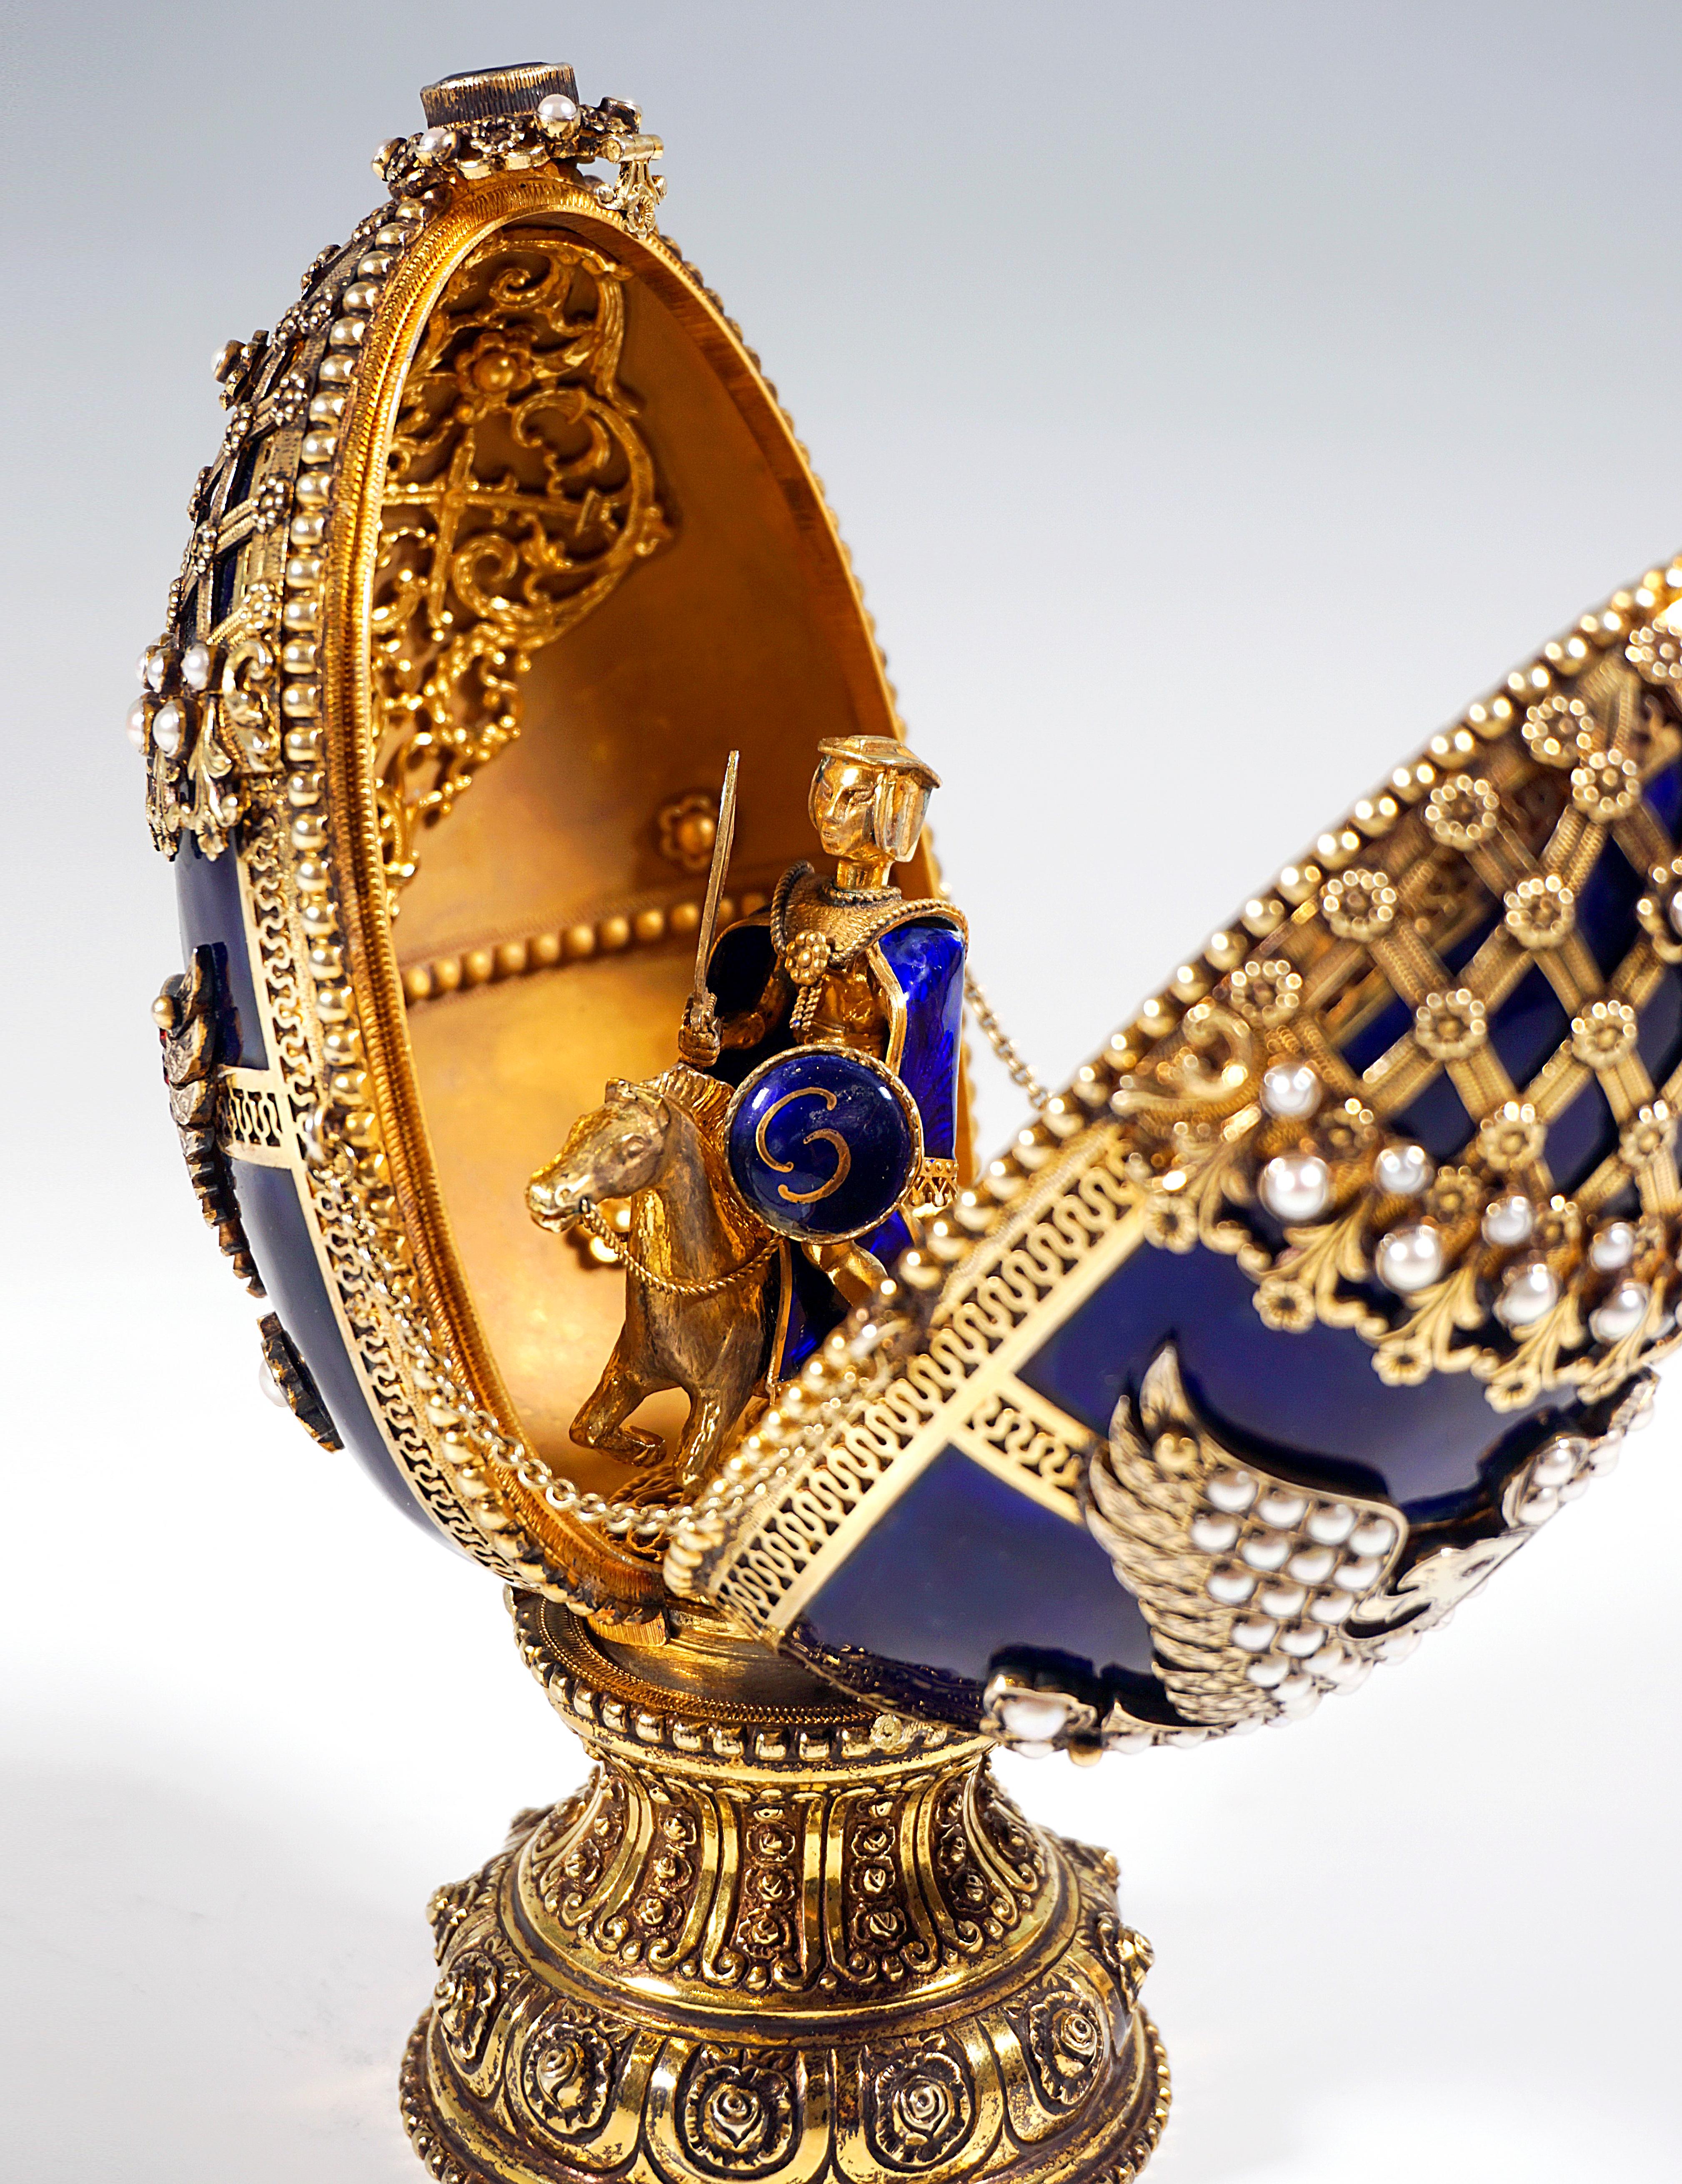 Hand-Crafted Fabergé Style Enamelled Silver Decorative Egg with Miniature, Russia